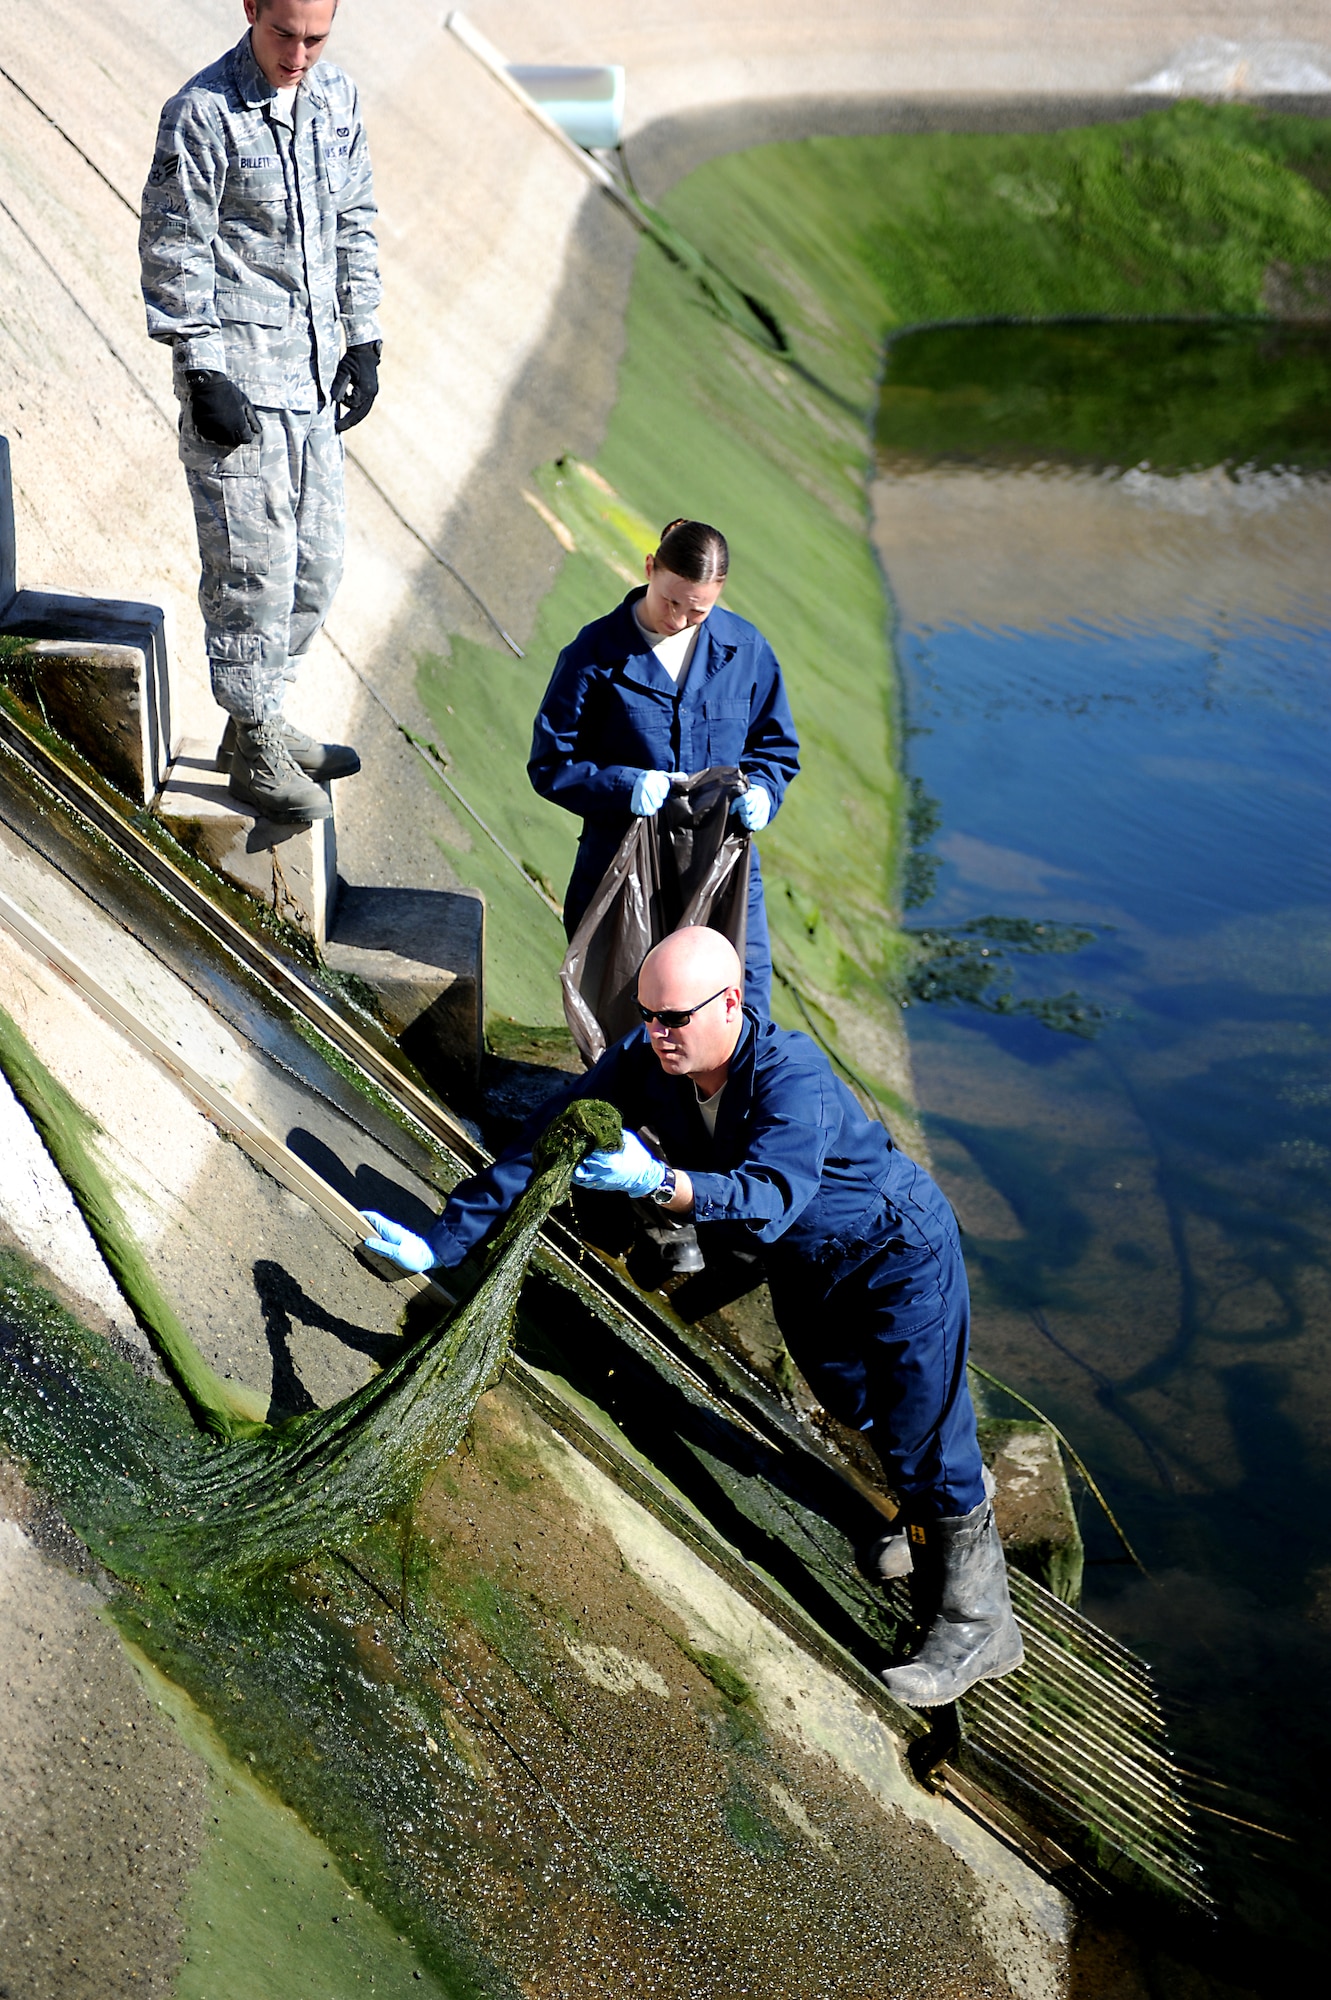 Chief Master Sgt. David Staton, 56th Fighter Wing command chief, pulls moss from the wall of the final treatment pond at the Luke Air Force Base waste water treatment facility. By the time the water arrives to this point it has been cleaned so well that fish can live in the pond and the water is used to irrigate the golf course. (U.S. Air Force photo/Staff Sgt. C.J. Hatch)